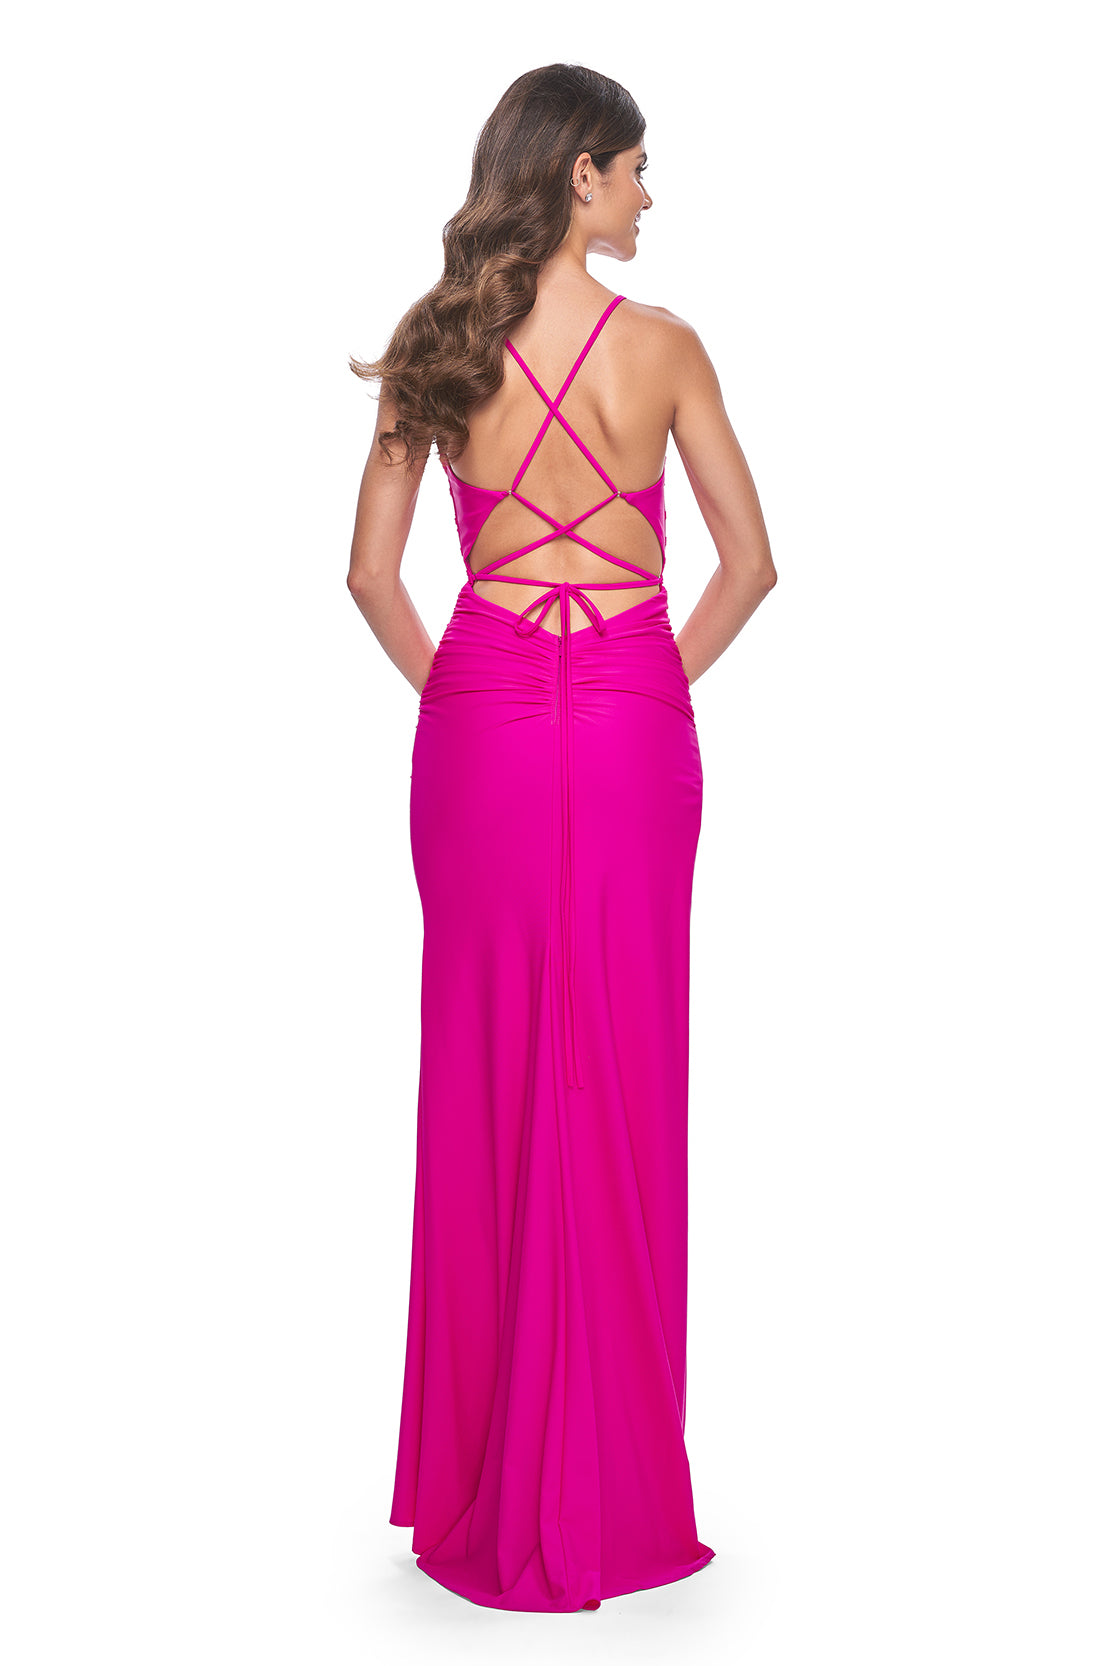 La Femme 32152 Ruched Jersey Prom Dress - Elevate your prom look with this meticulously ruched jersey gown featuring a gracefully draped neckline, an alluring open lace-up back, and a high slit for added glamour.  The model is wearing the dress in the color hot fuchsia.